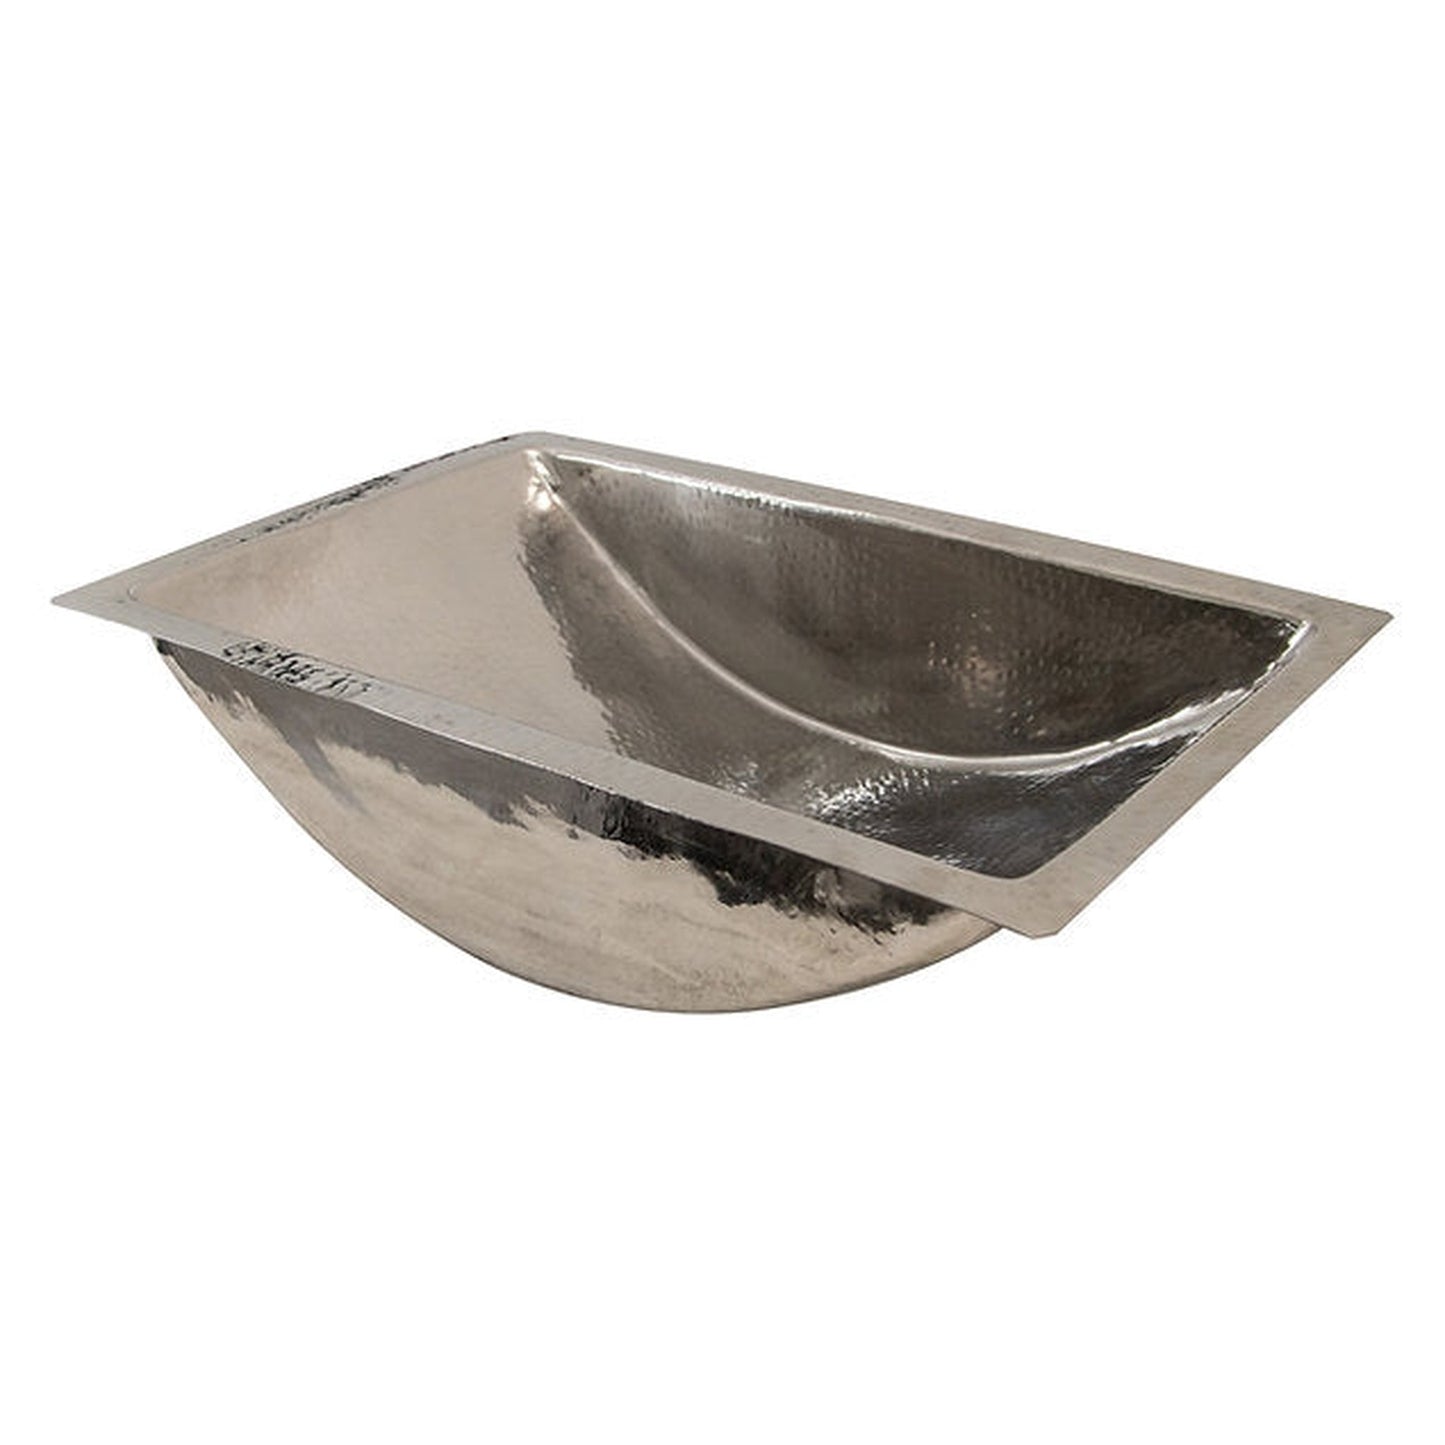 Nantucket Sinks Brightwork Home 24" W x 16" D" Rectangular Hand Hammered Polished Stainless Steel Dualmount Sink